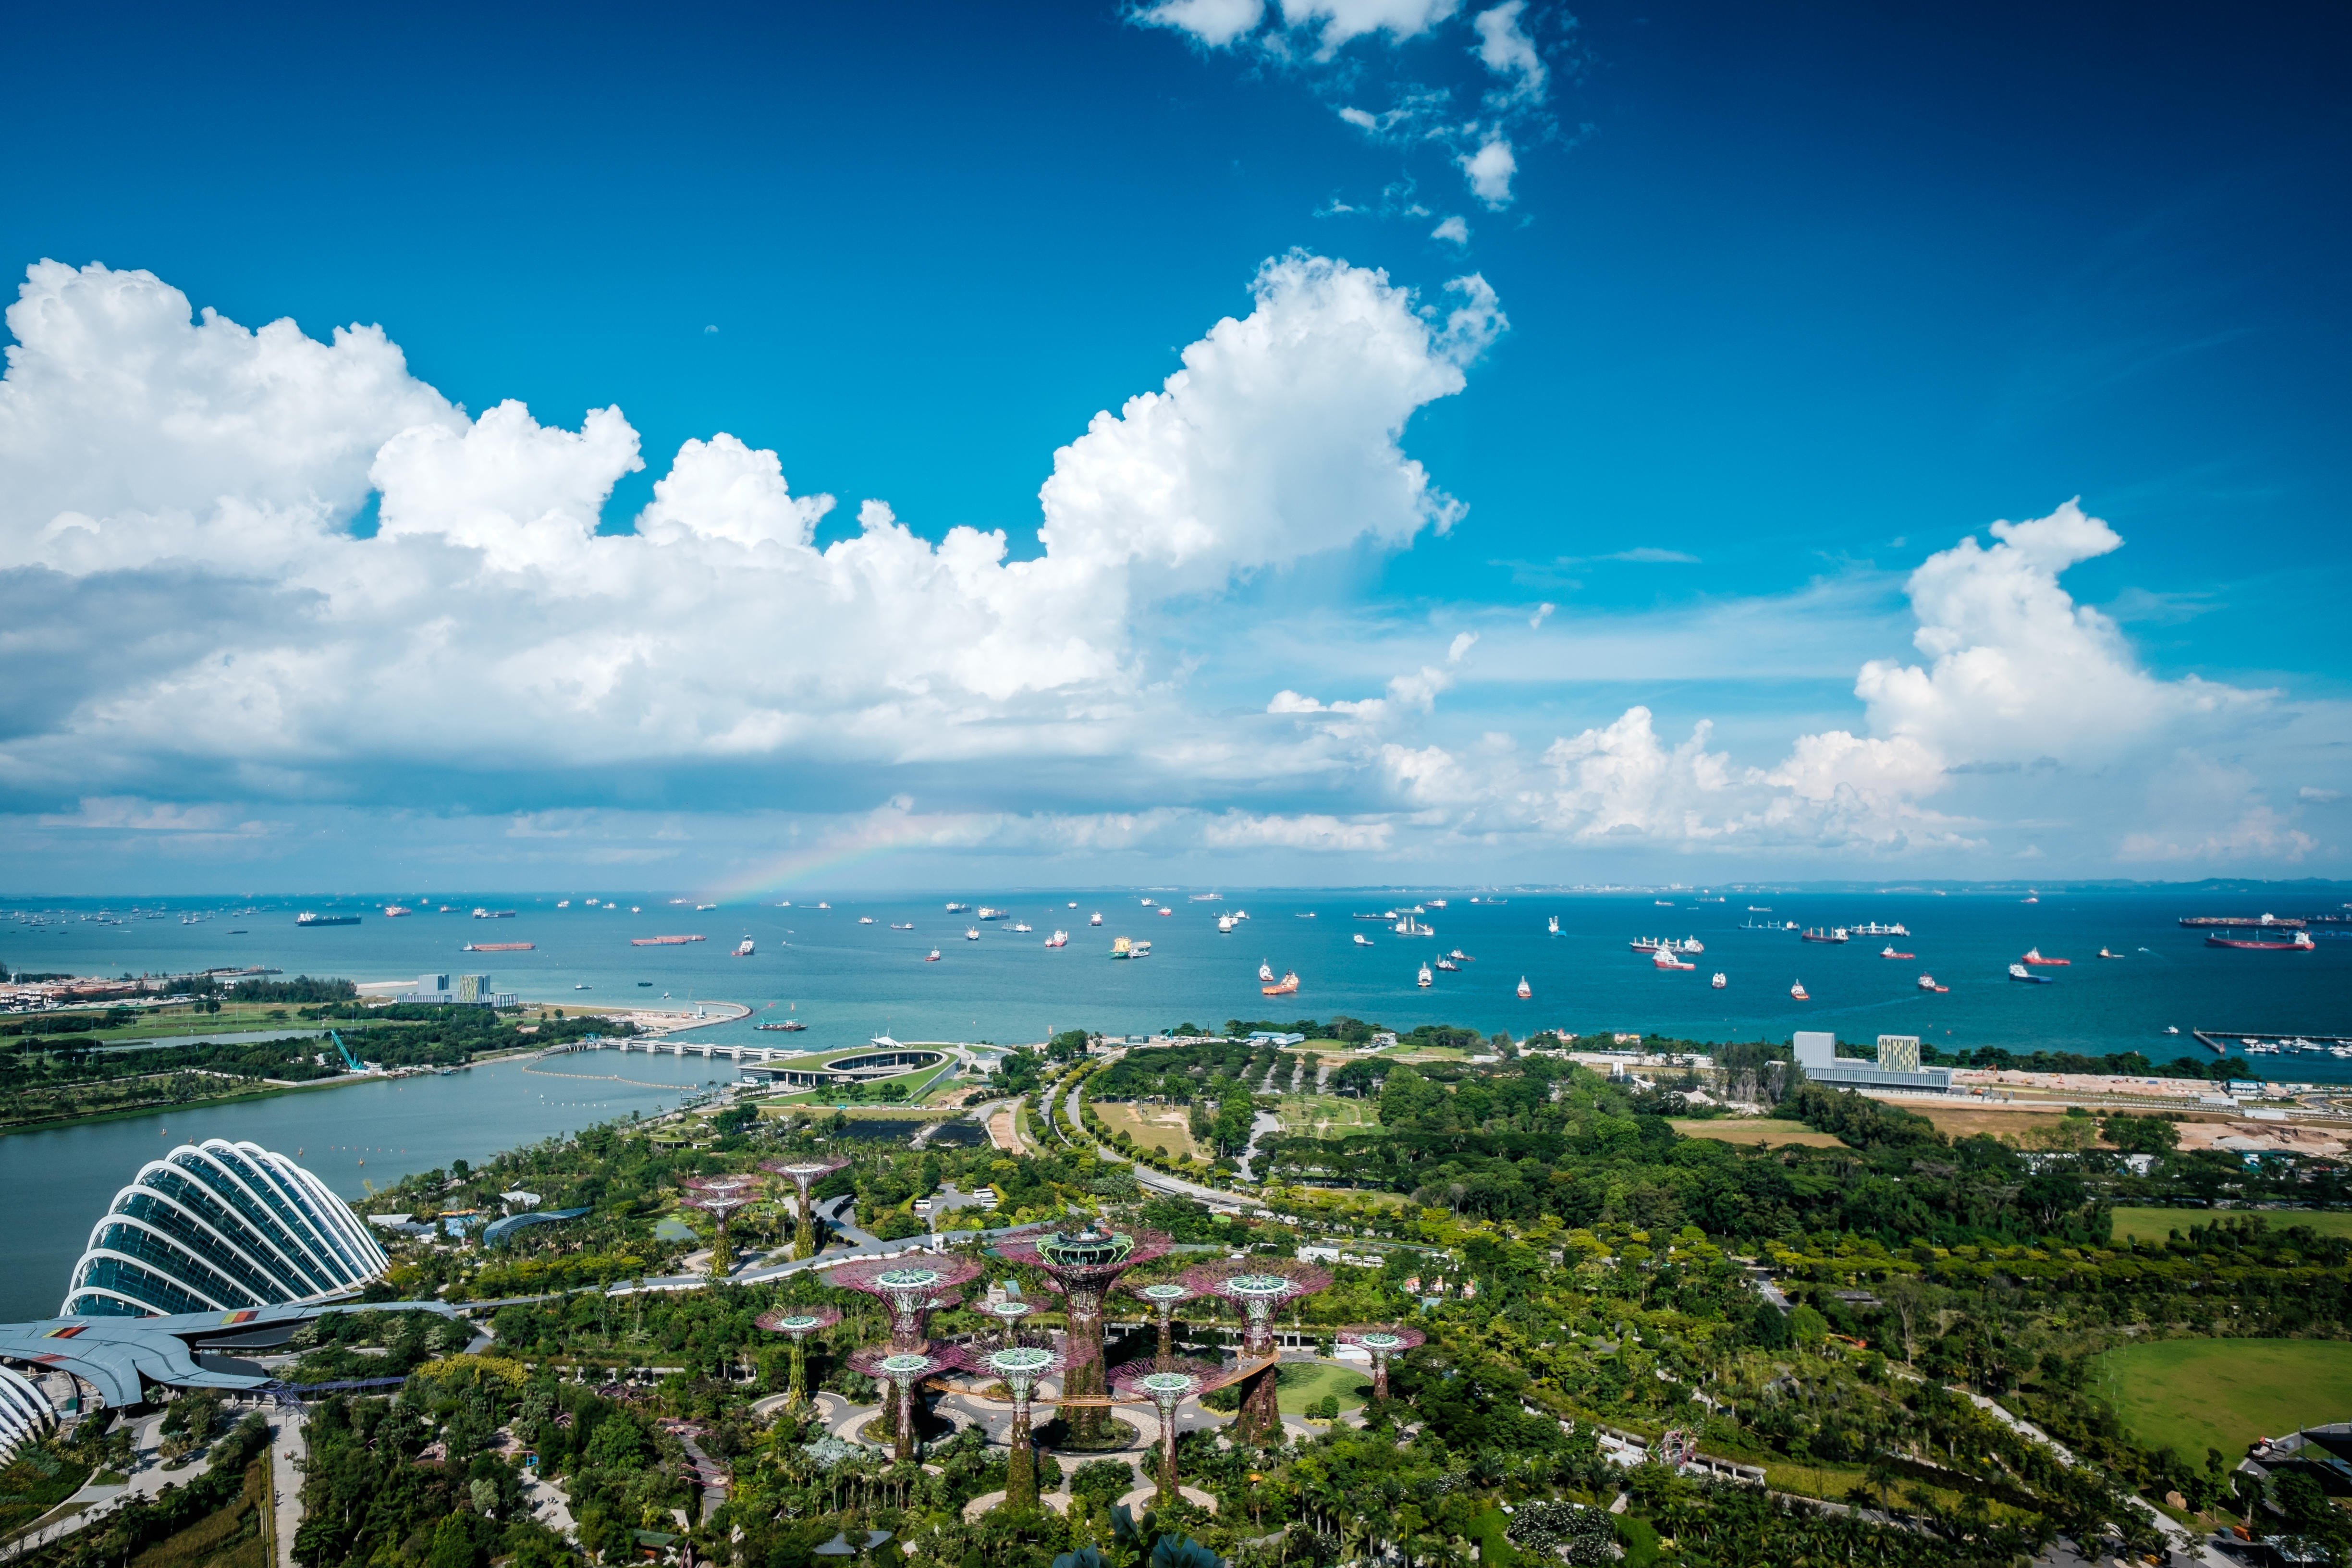 Gardens by the Bay is one of Singapore’s most popular attractions. Photo: Alamy